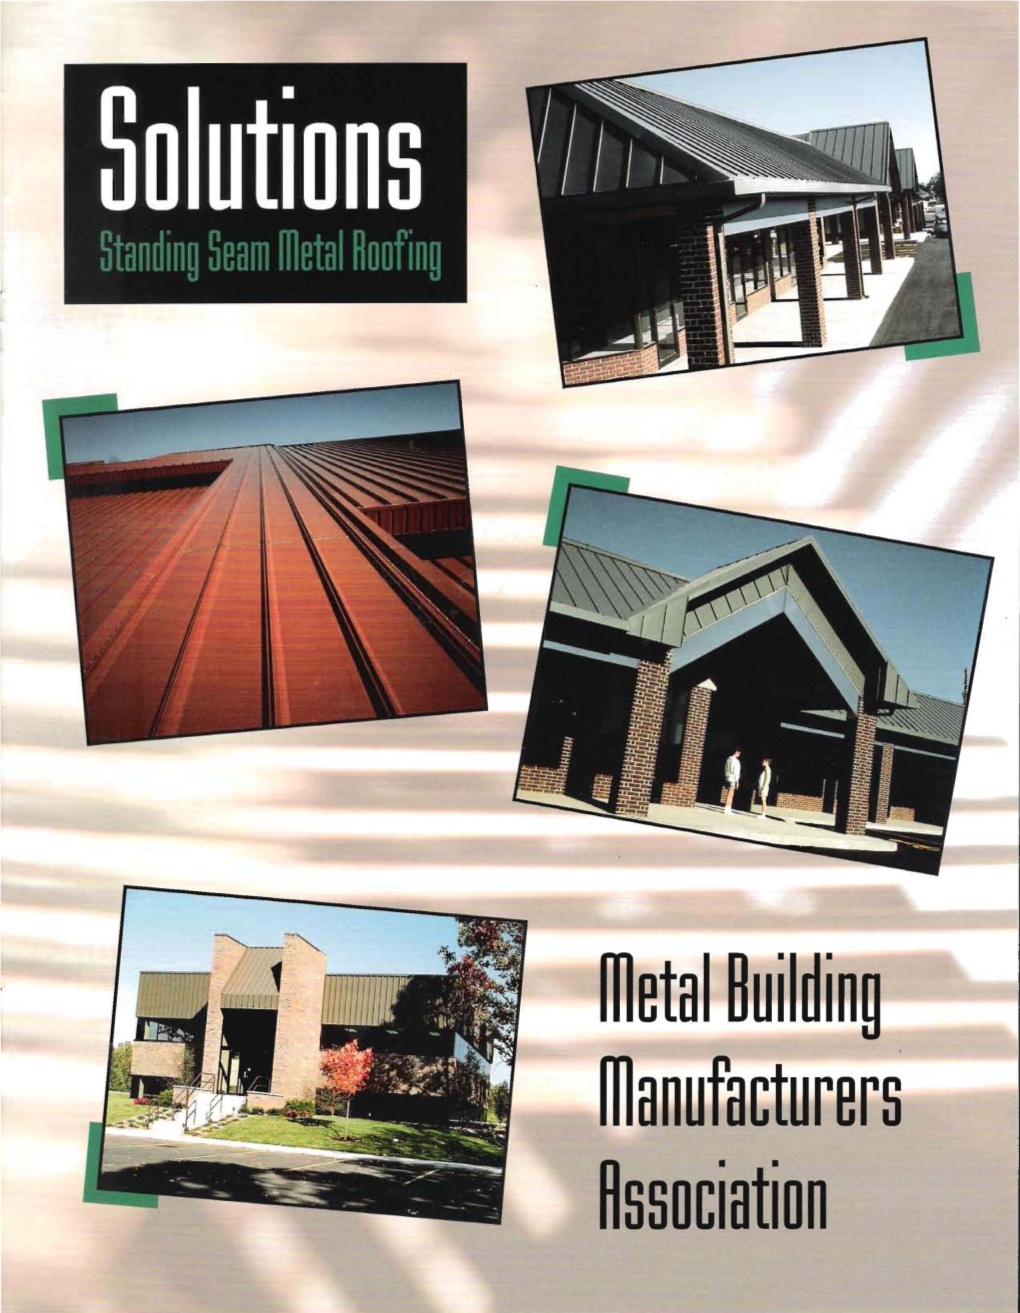 Standing Seam Metal Roofing Is Installed Annually, Underscoring the System's Versatility and Proven Performance